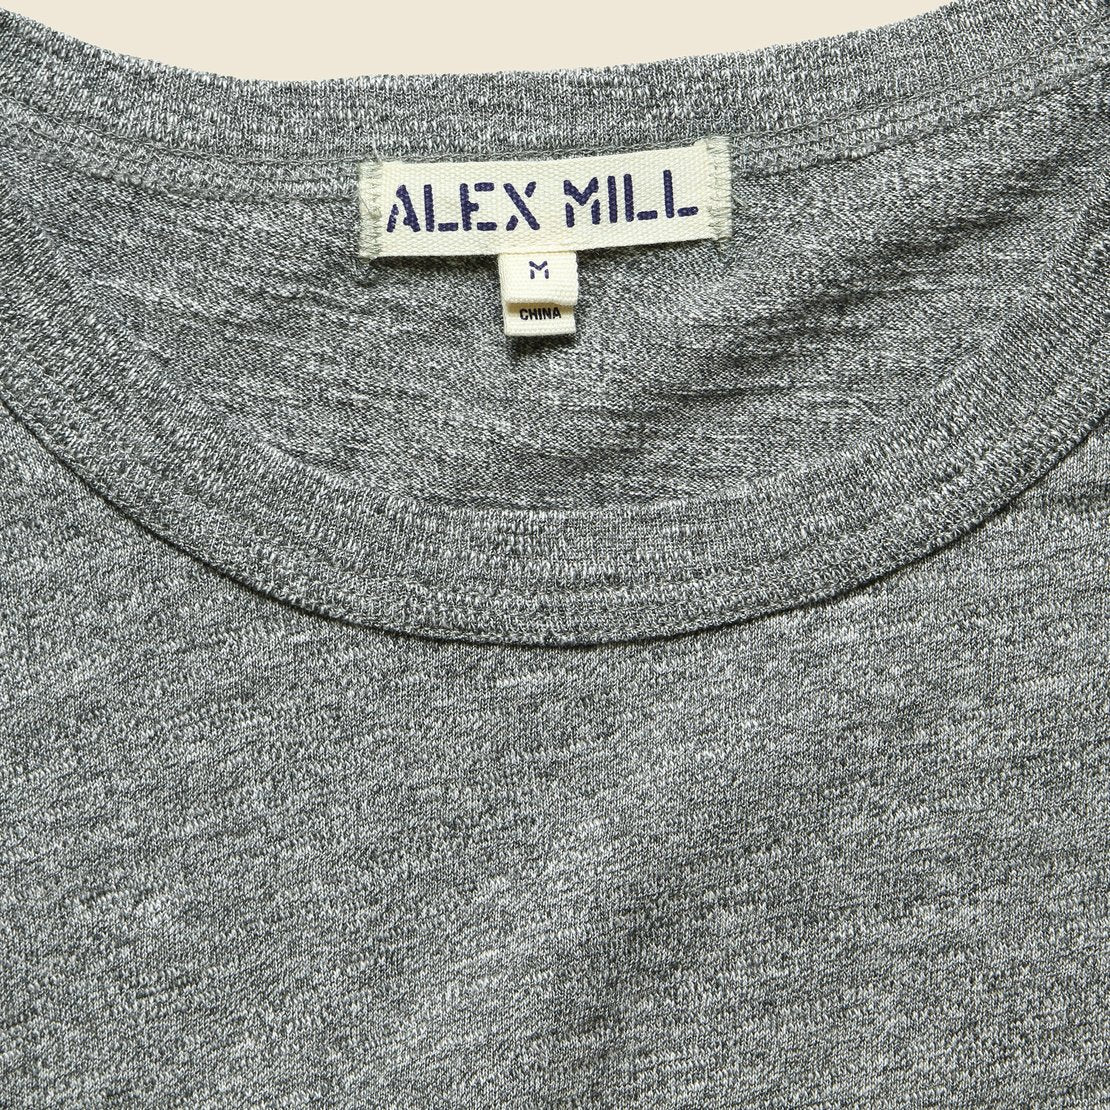 DEAD SKU - New Standard Crew Tee - Marled Grey - Alex Mill - STAG Provisions - Tops - S/S Tee